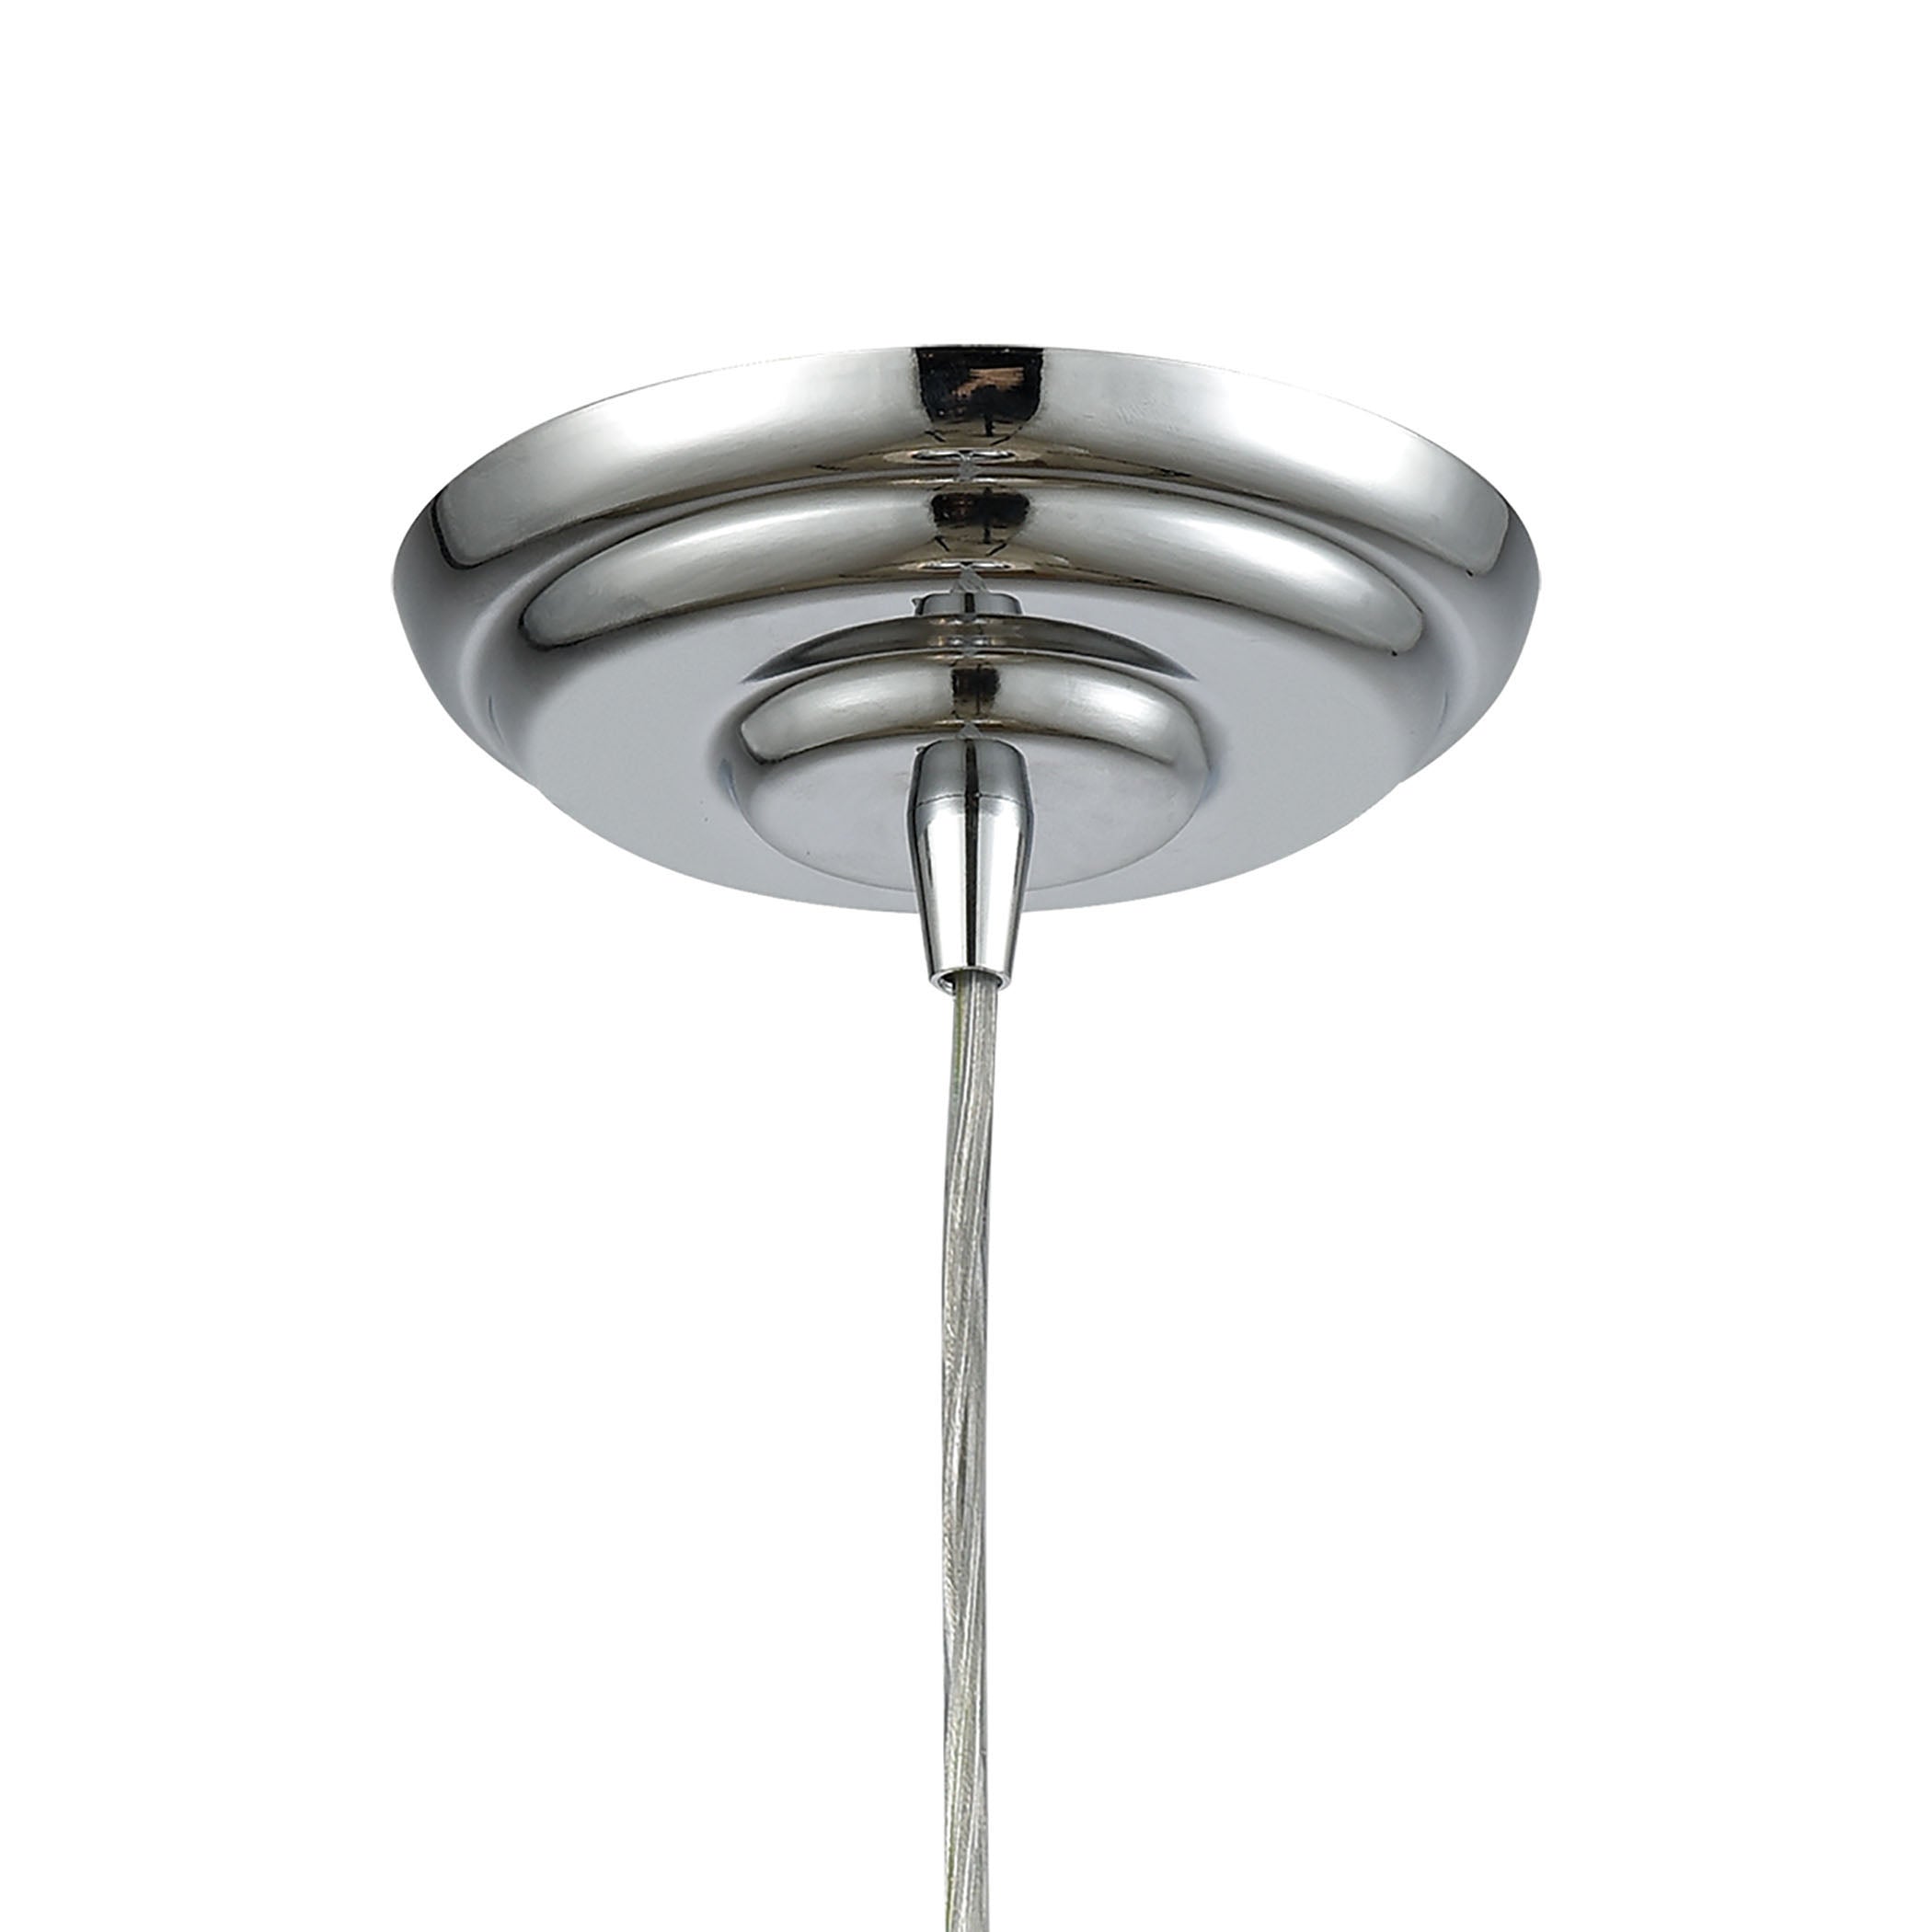 ELK Lighting 56595/1 Swirl 1-Light Mini Pendant in Polished Chrome with Clear Etched Glass